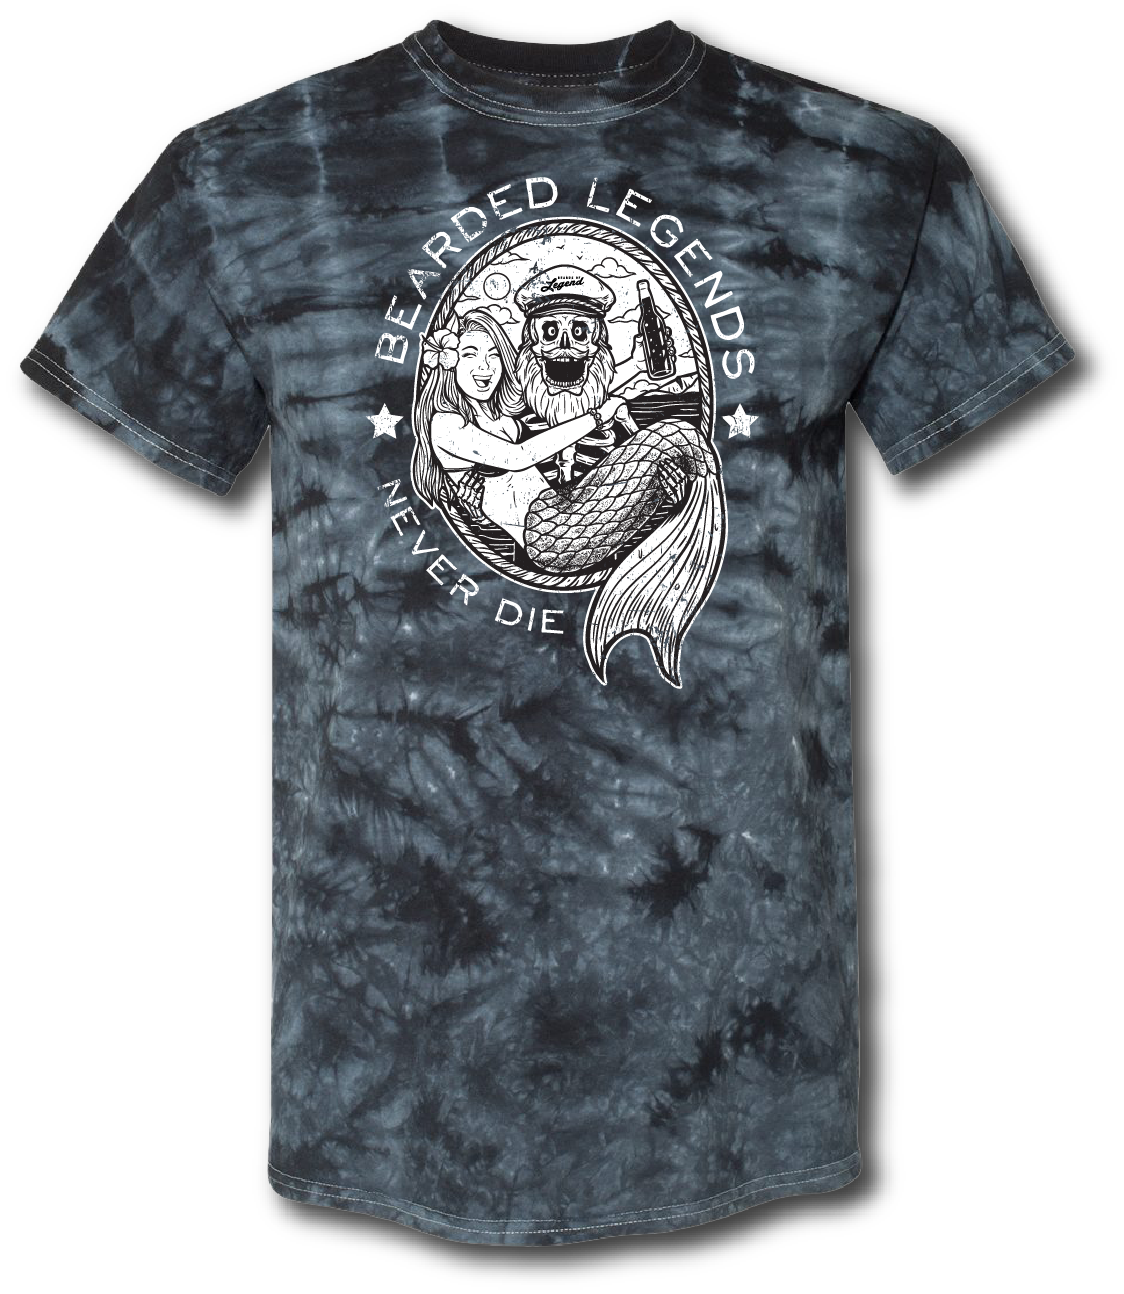 Bearded Legends Never Die Tie Dyed Short Sleeve T-shirt